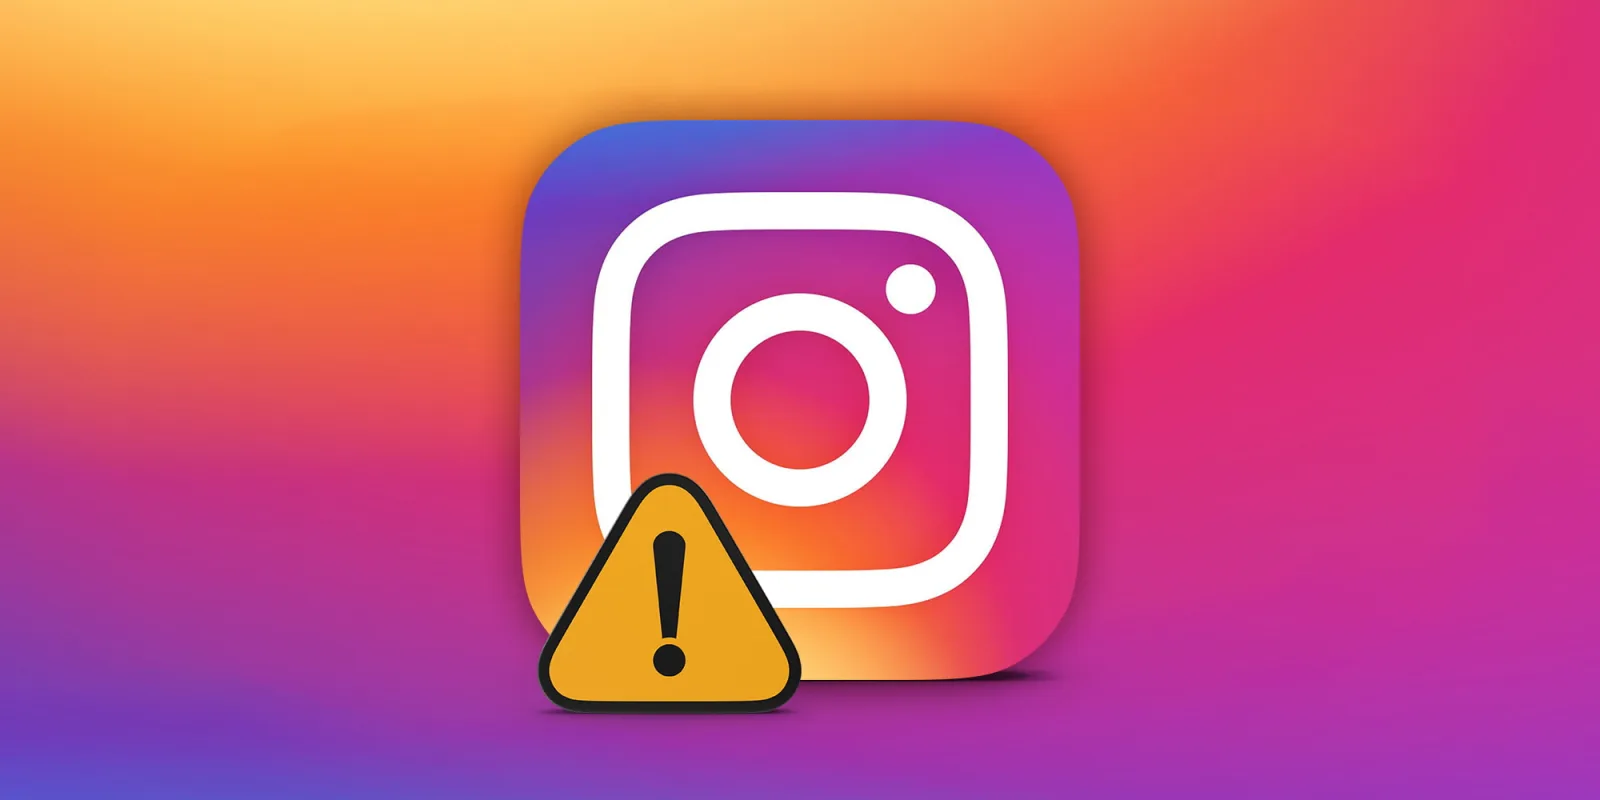 Instagram users are getting suspended randomly and not able to login into their accounts